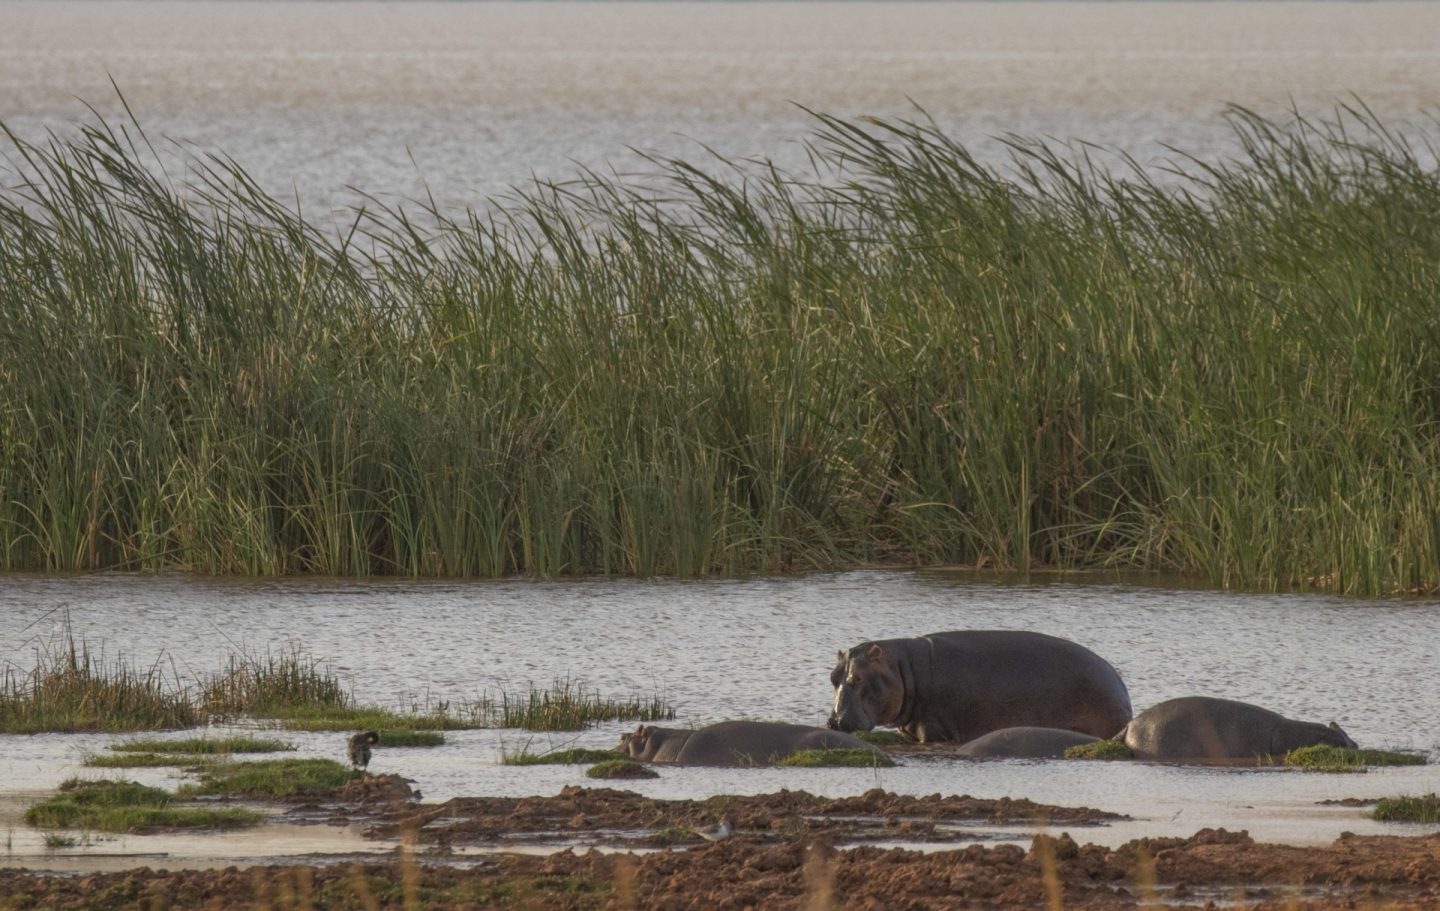 Hippo in the reed beds by Tsavo West.